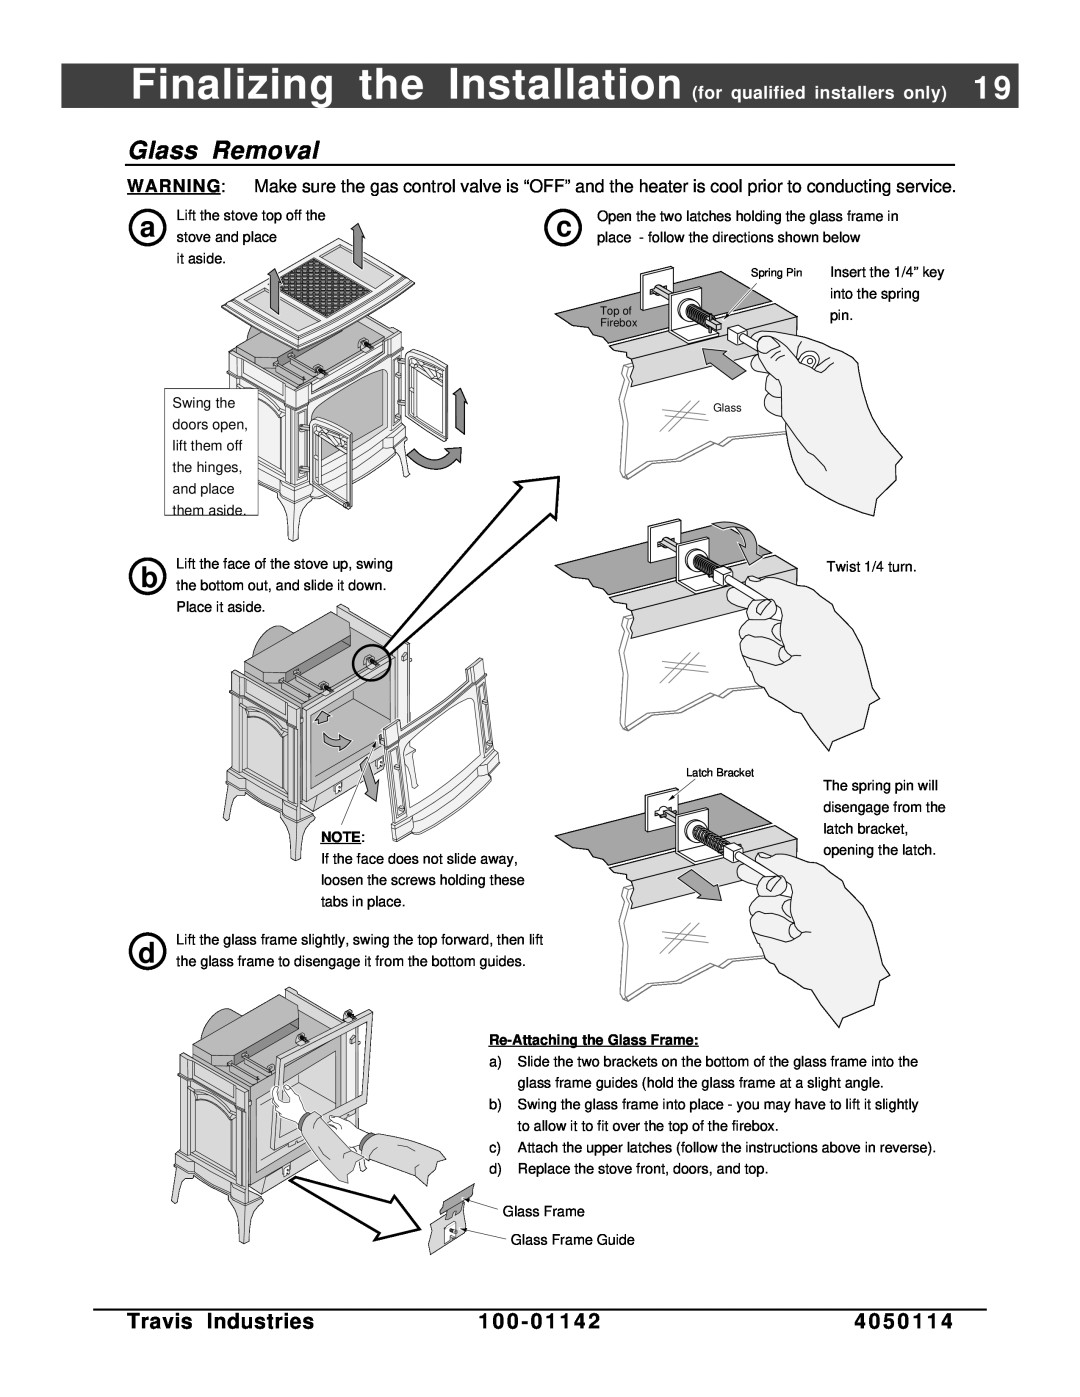 Lopi Direct Vent Freestanding Stove owner manual Glass Removal, Travis Industries, 1 0 0 - 0 1, 4 0 